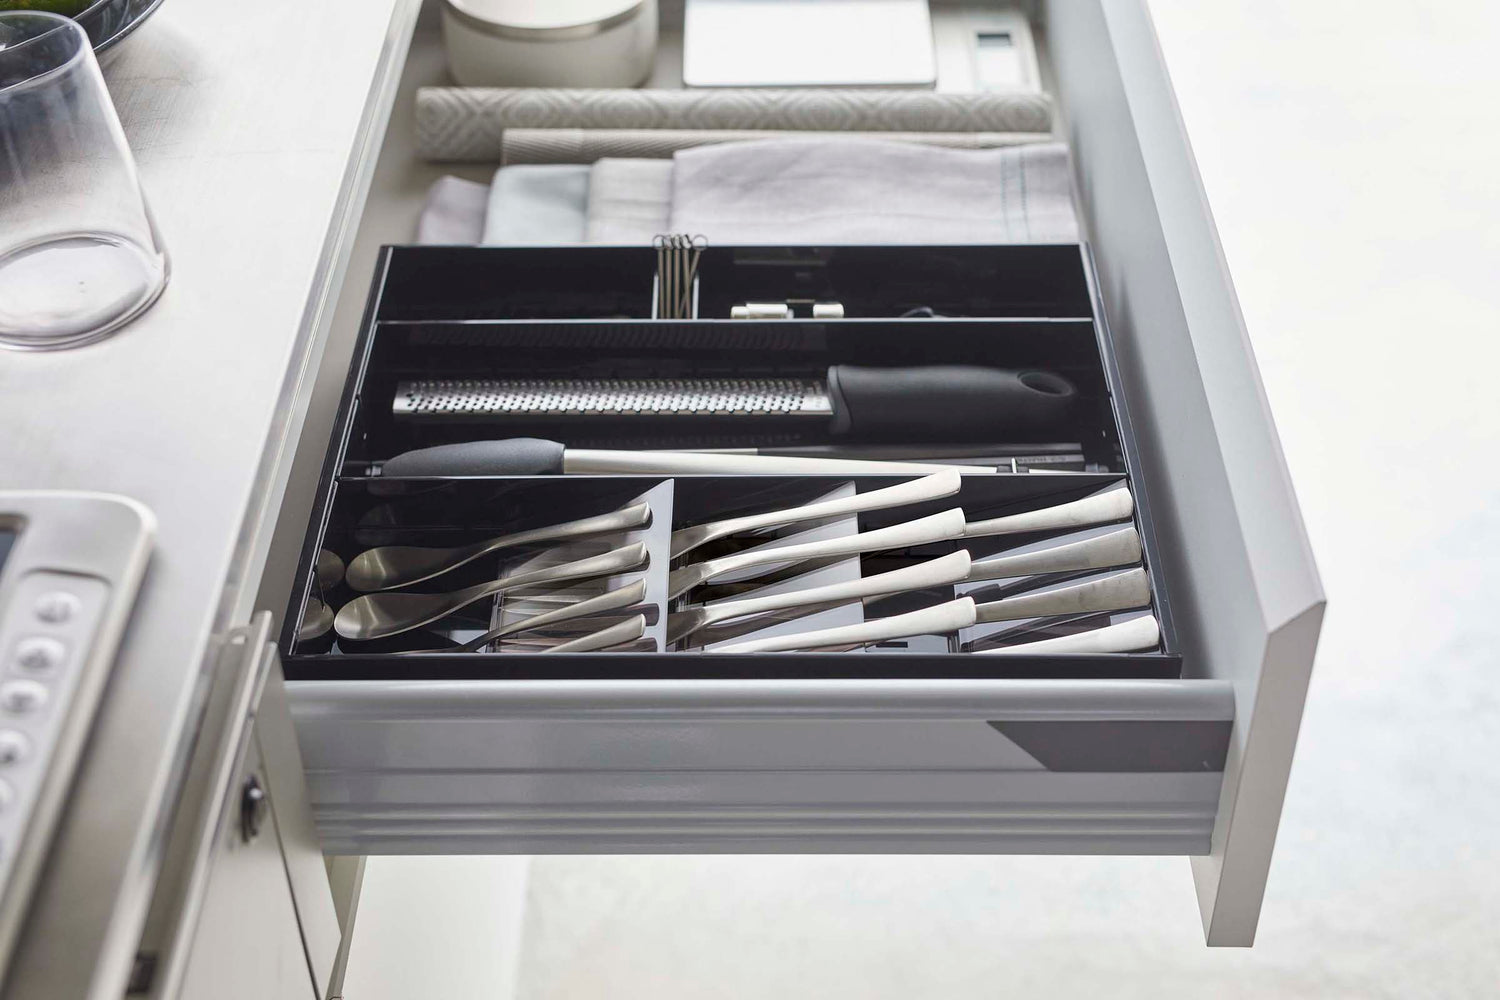 View 24 - Side view of black Expandable Cutlery Storage Organizer by Yamazaki Home.